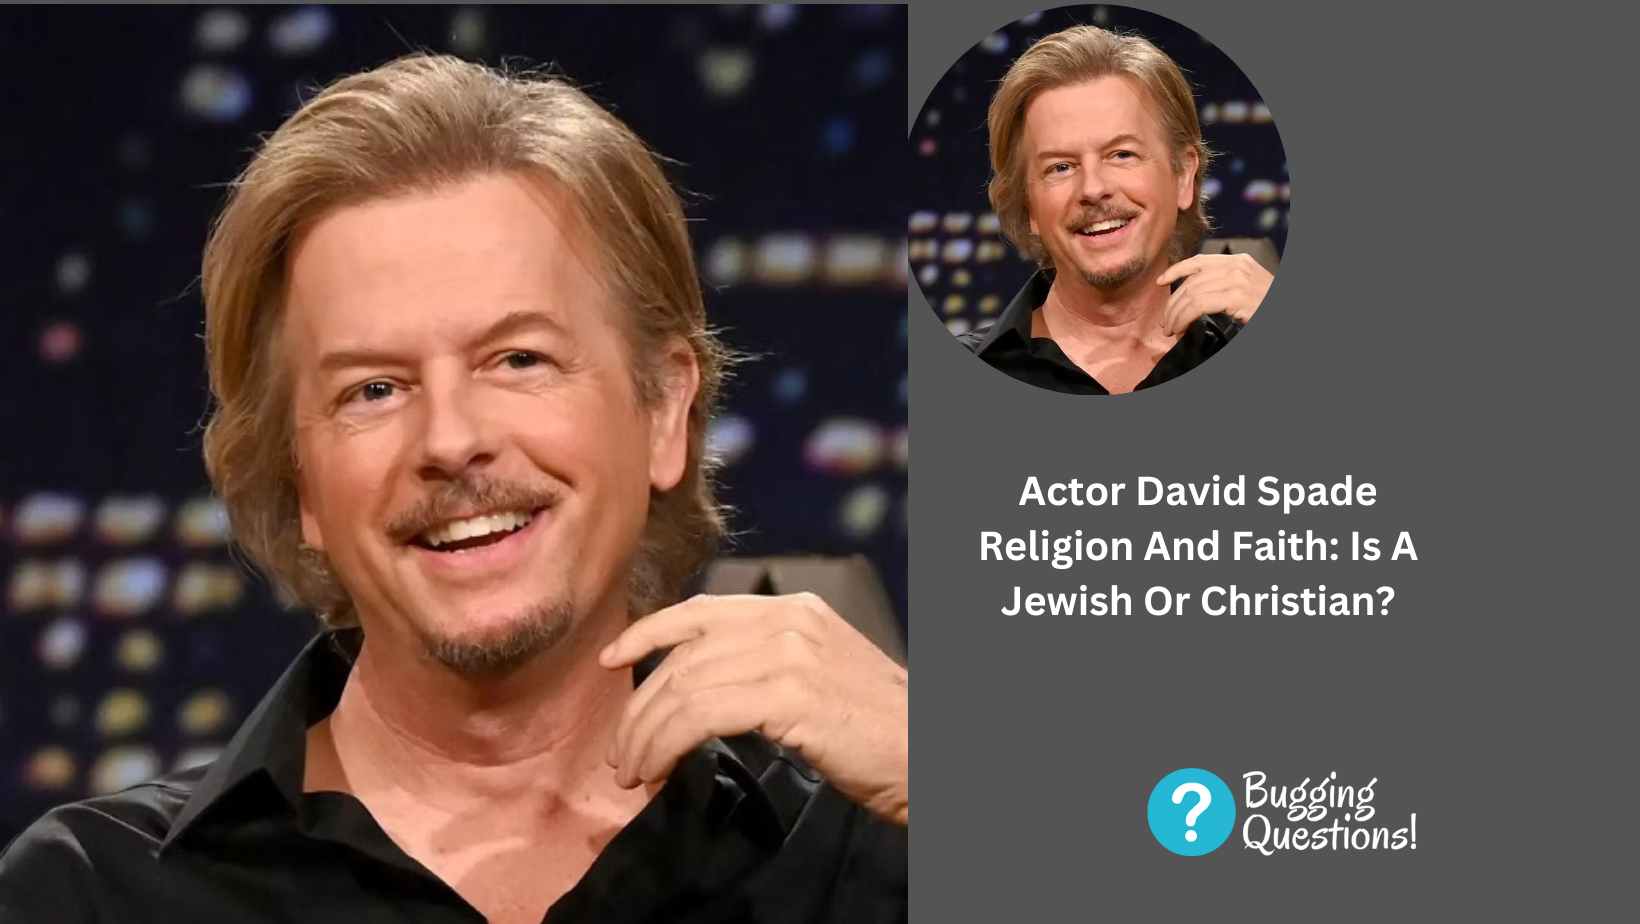 Actor David Spade Religion And Faith: Is A Jewish Or Christian?